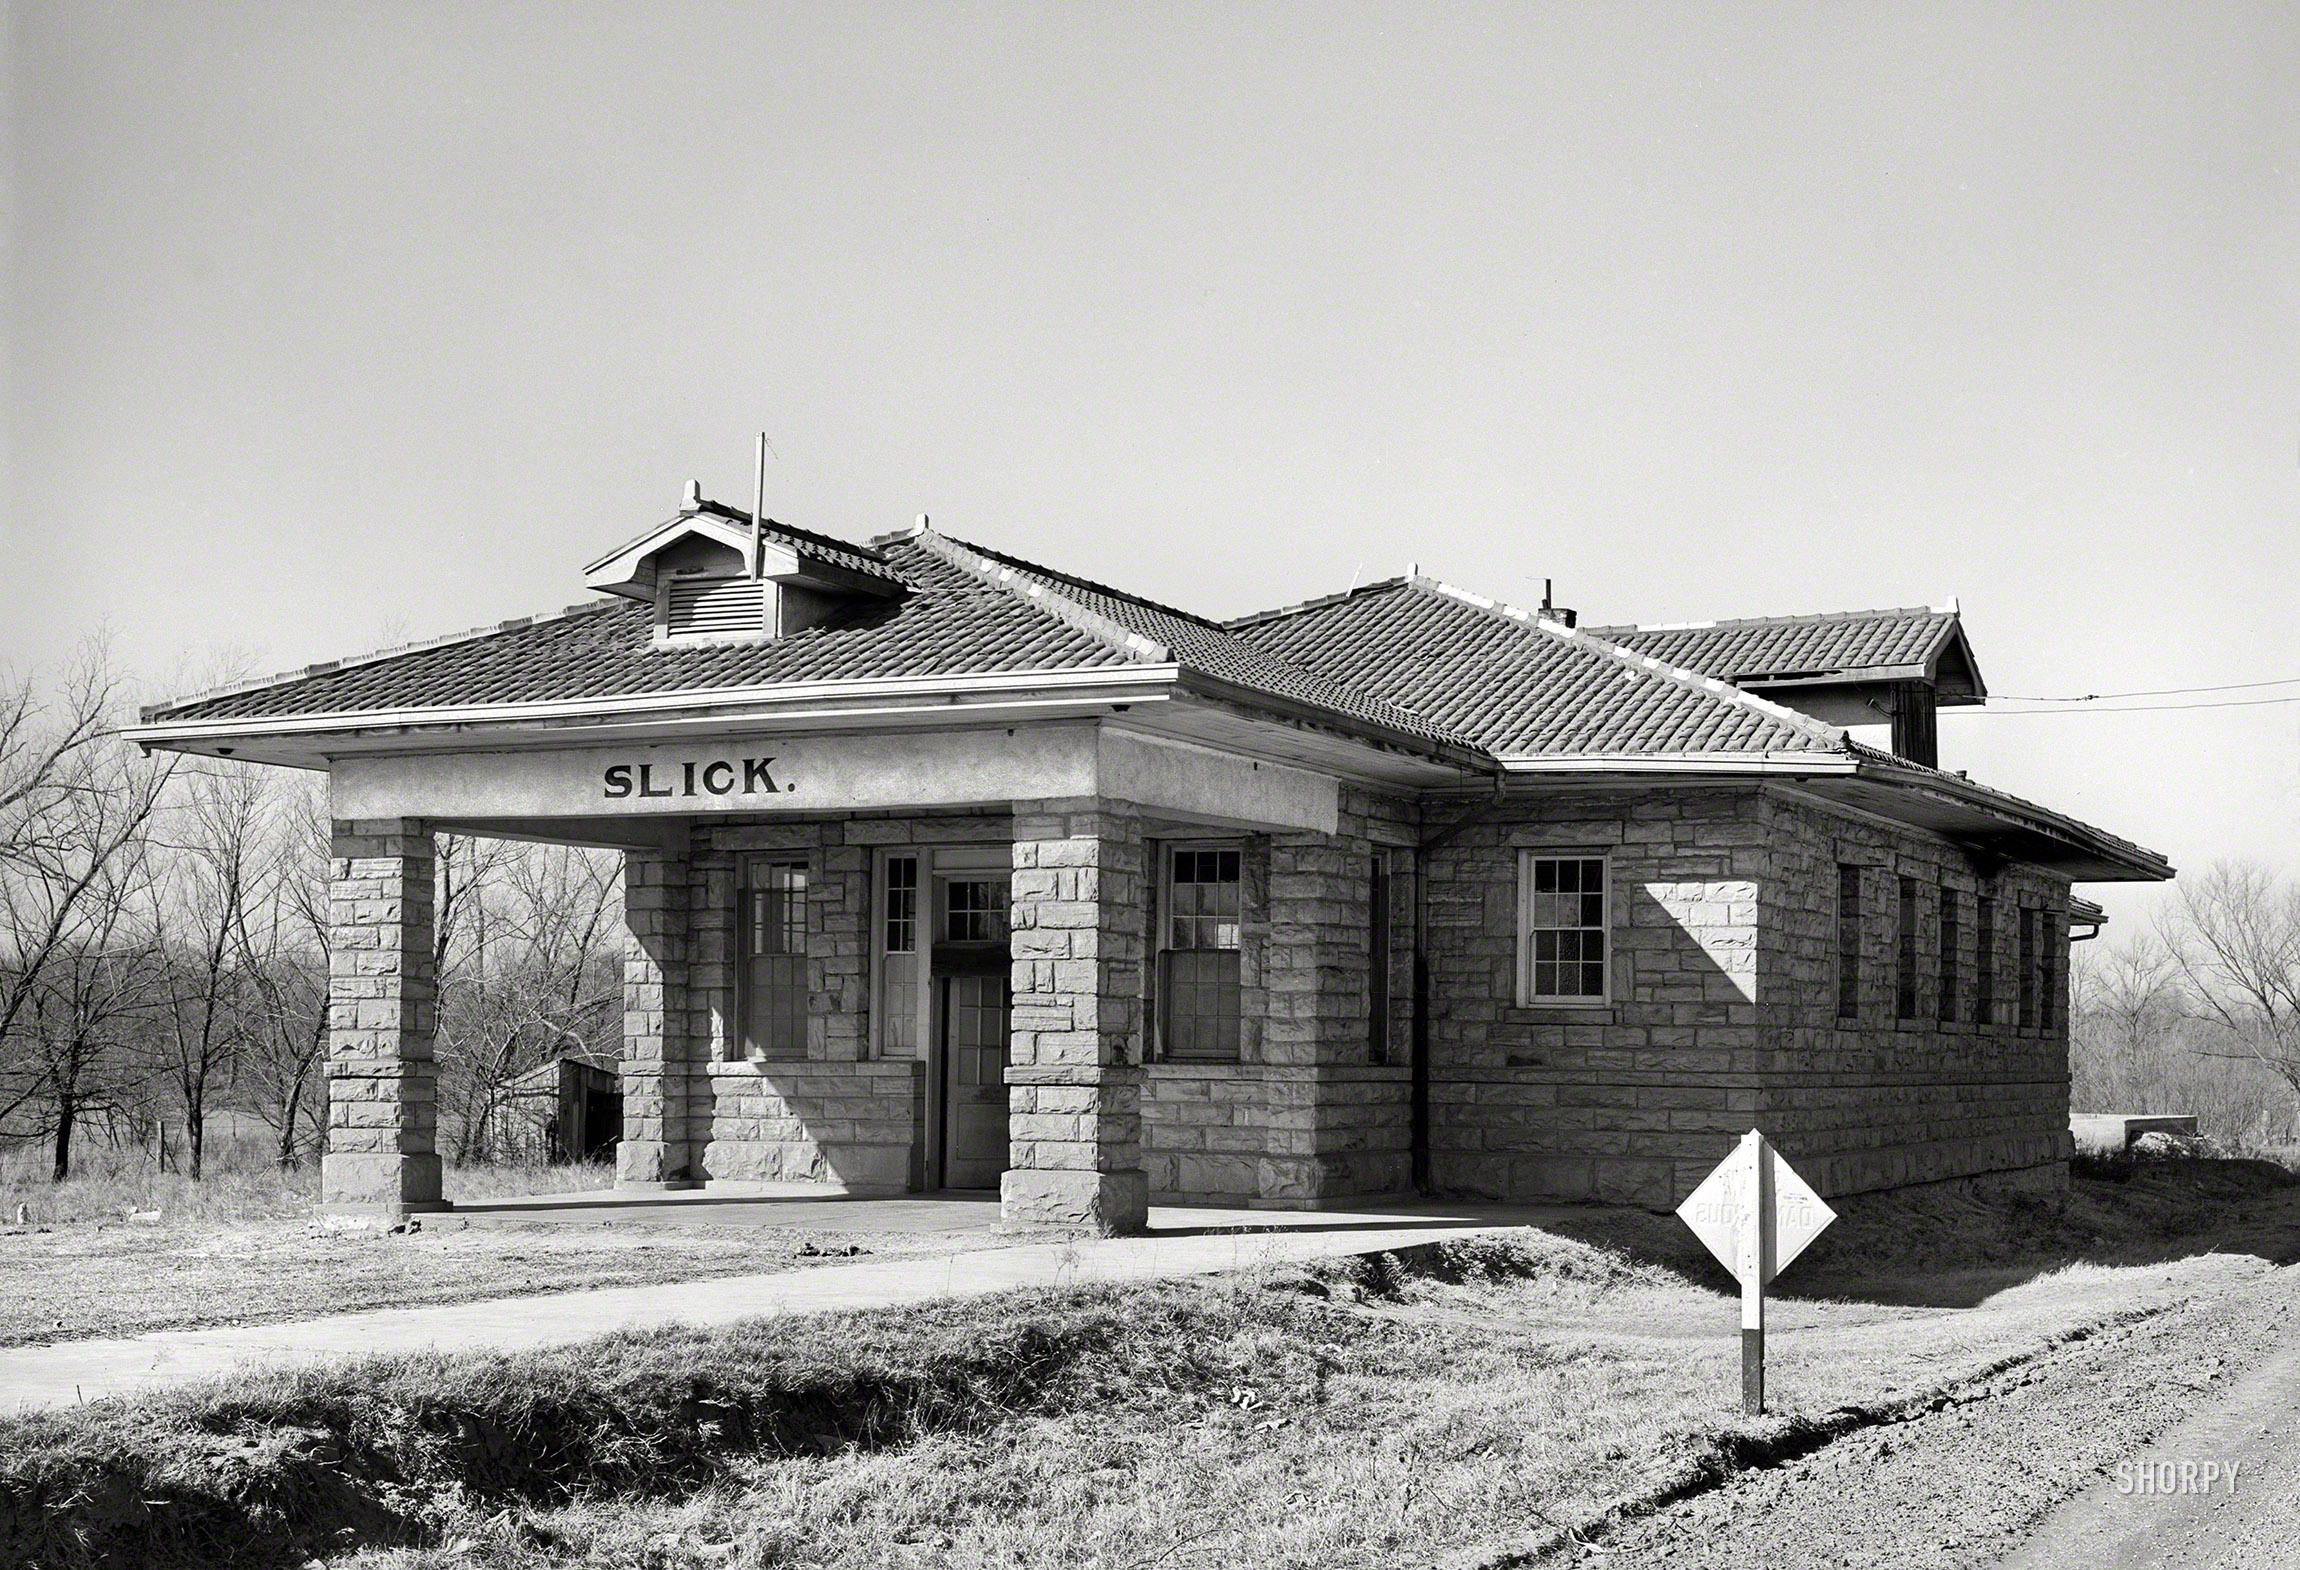 February 1940. "Abandoned railway station, now used as a church, in the oil ghost town of Slick, Oklahoma." Medium format acetate negative by Russell Lee for the Farm Security Administration. View full size.